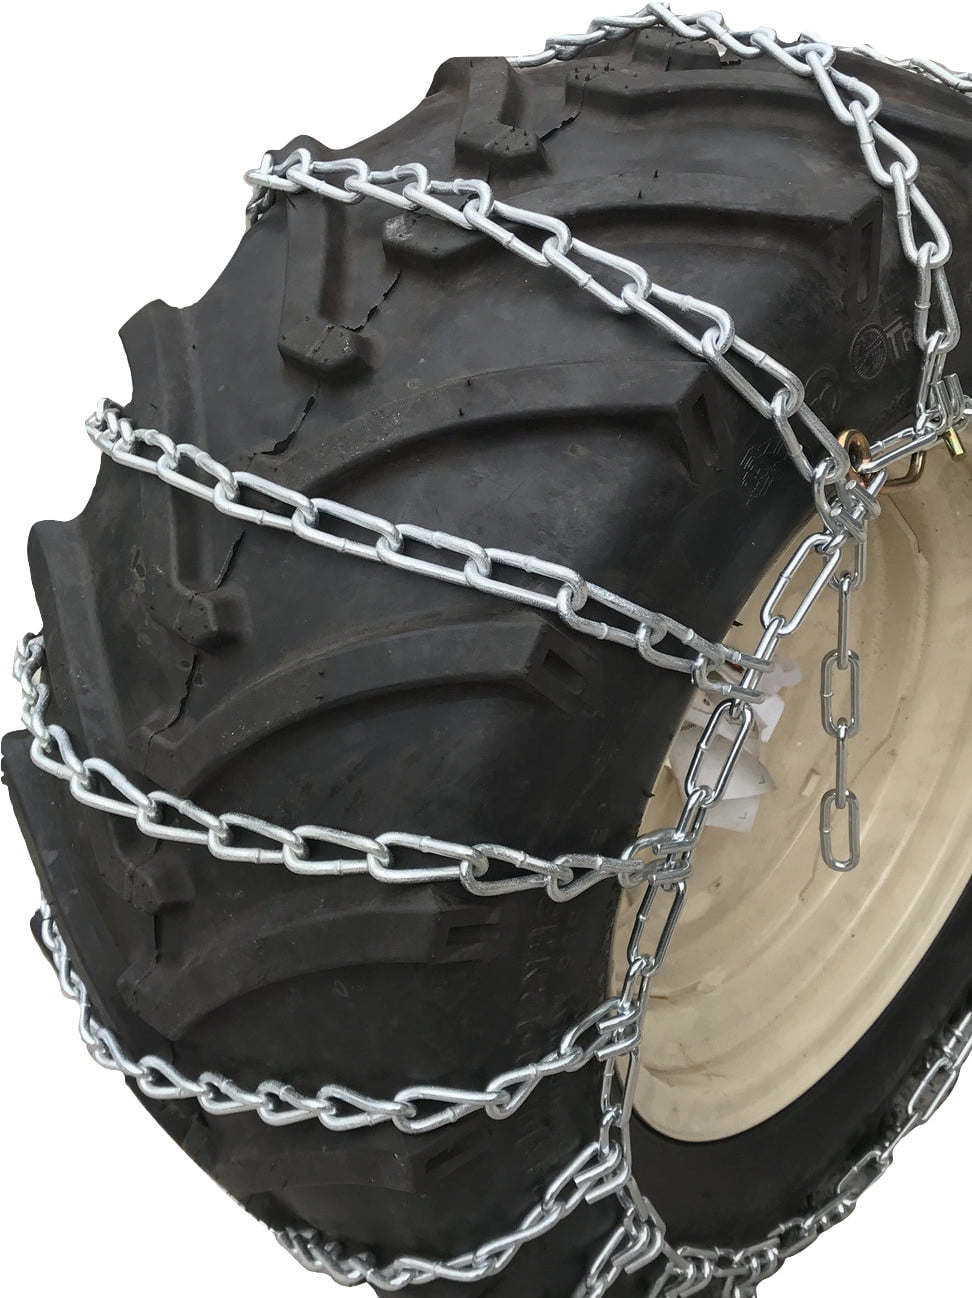 TireChain.com 25 X 8.5 X 14 25 8.5 14 Medium Duty Tractor Tire Chains w/Spring Tensioners 